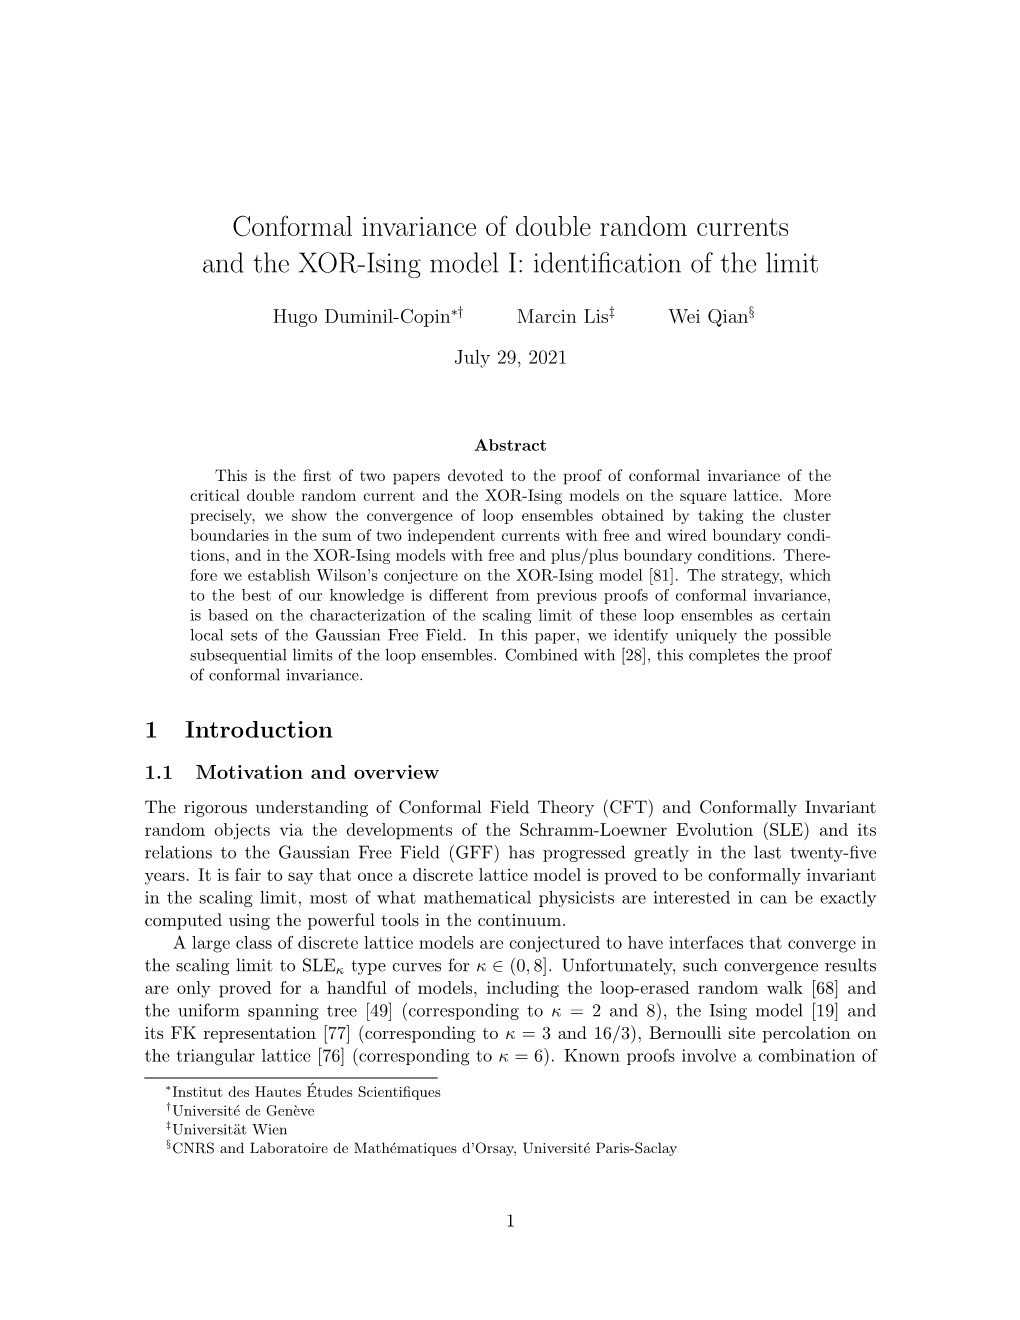 Conformal Invariance of Double Random Currents and the XOR-Ising Model I: Identiﬁcation of the Limit